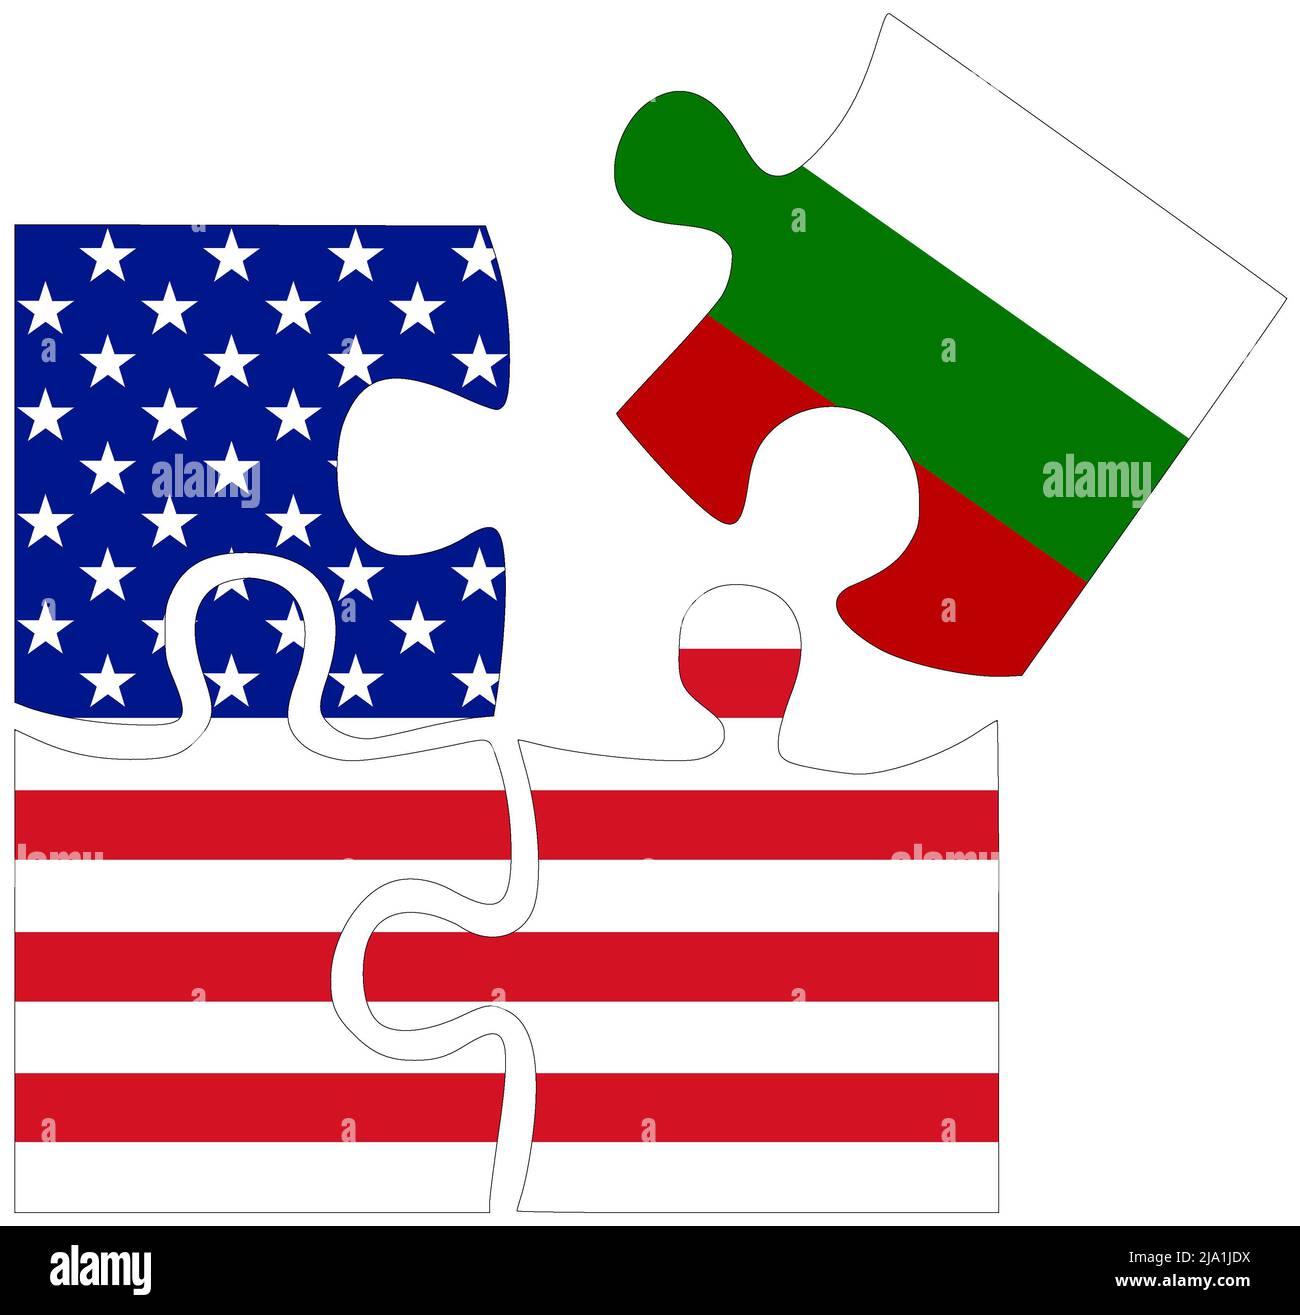 USA - Bulgaria : puzzle shapes with flags, symbol of agreement or friendship Stock Photo